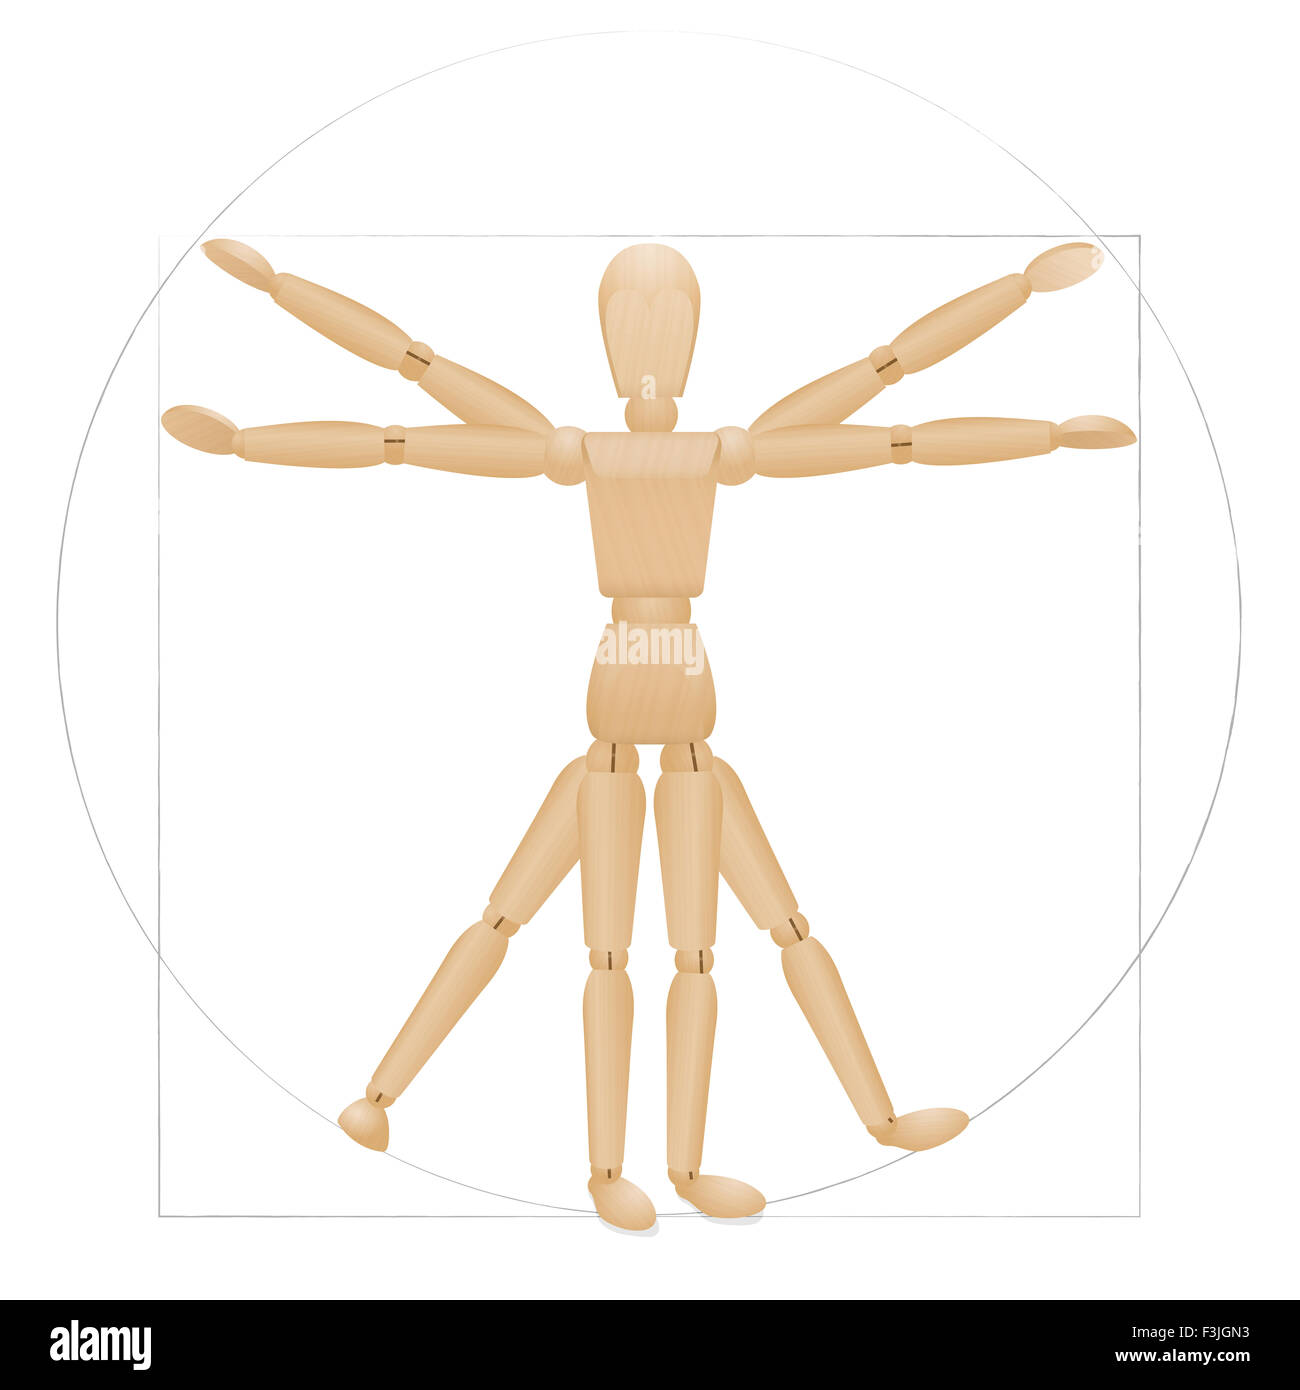 Vitruvian mannequin - sacred geometry in graphic art and anatomical proportions represented by a wooden lay figure. Stock Photo